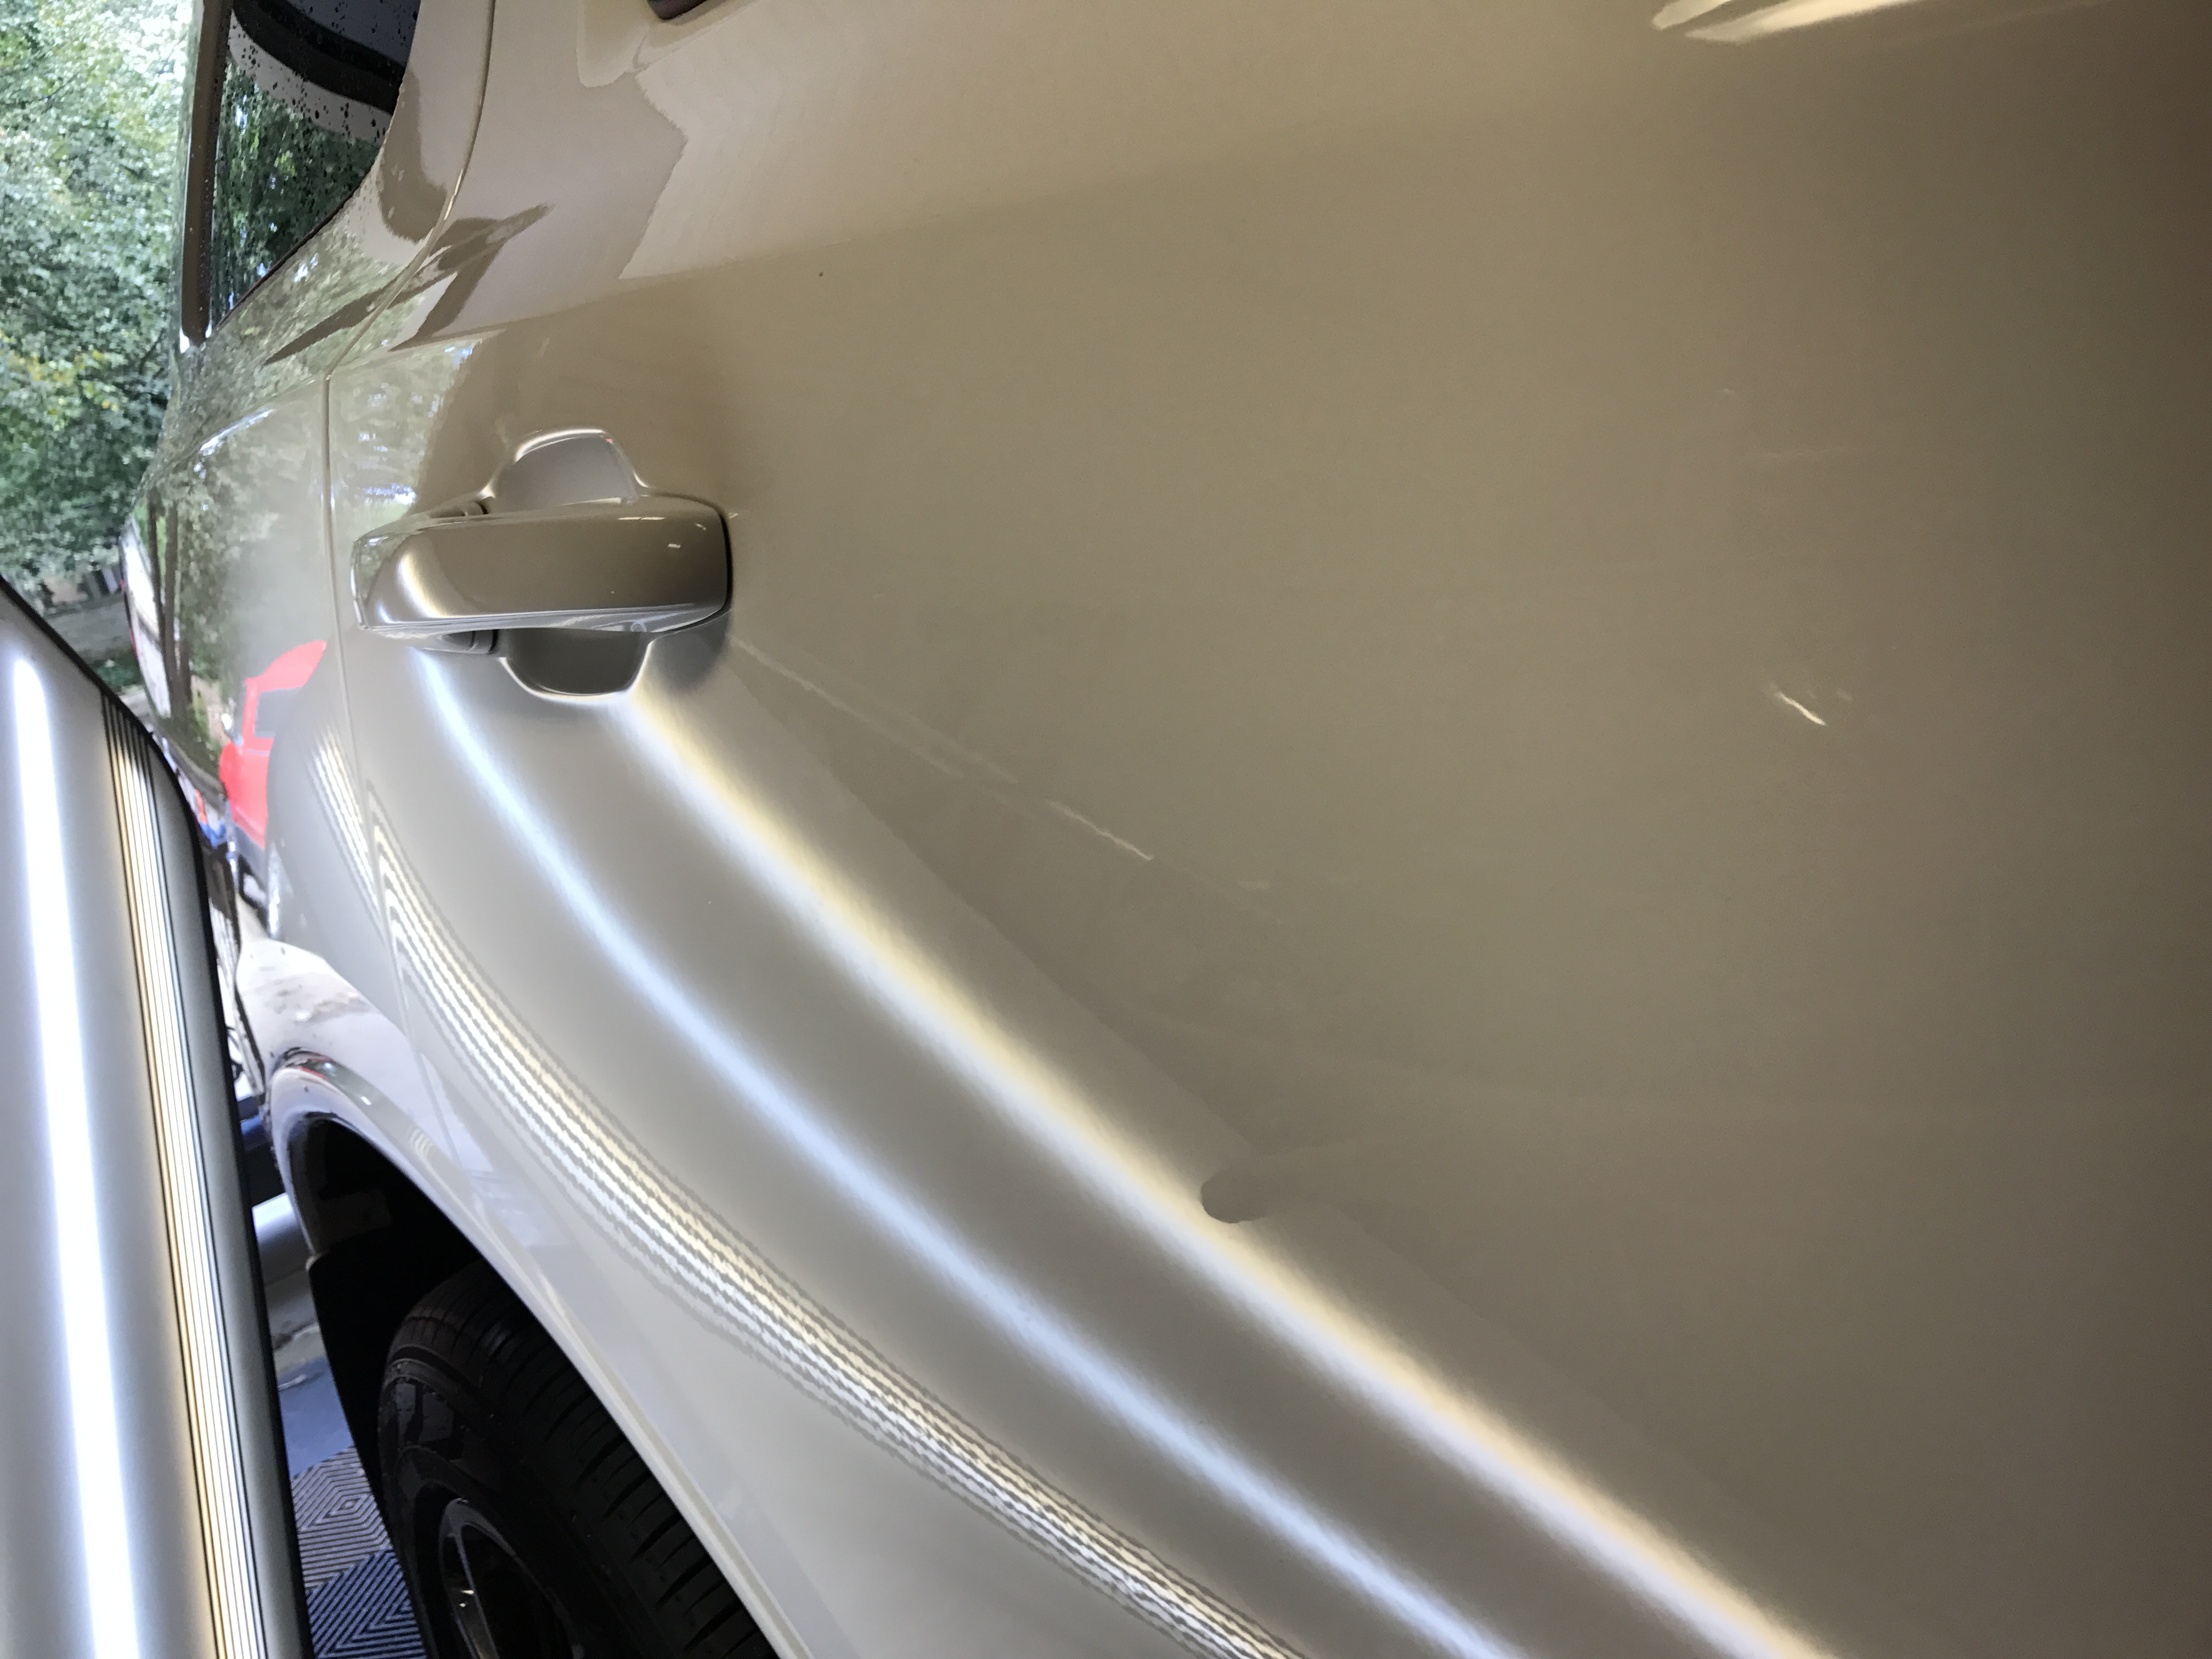 2015 Dodge Durango RT Paintless Dent Removal, Springfield IL https://217dent.com After Image of door damage